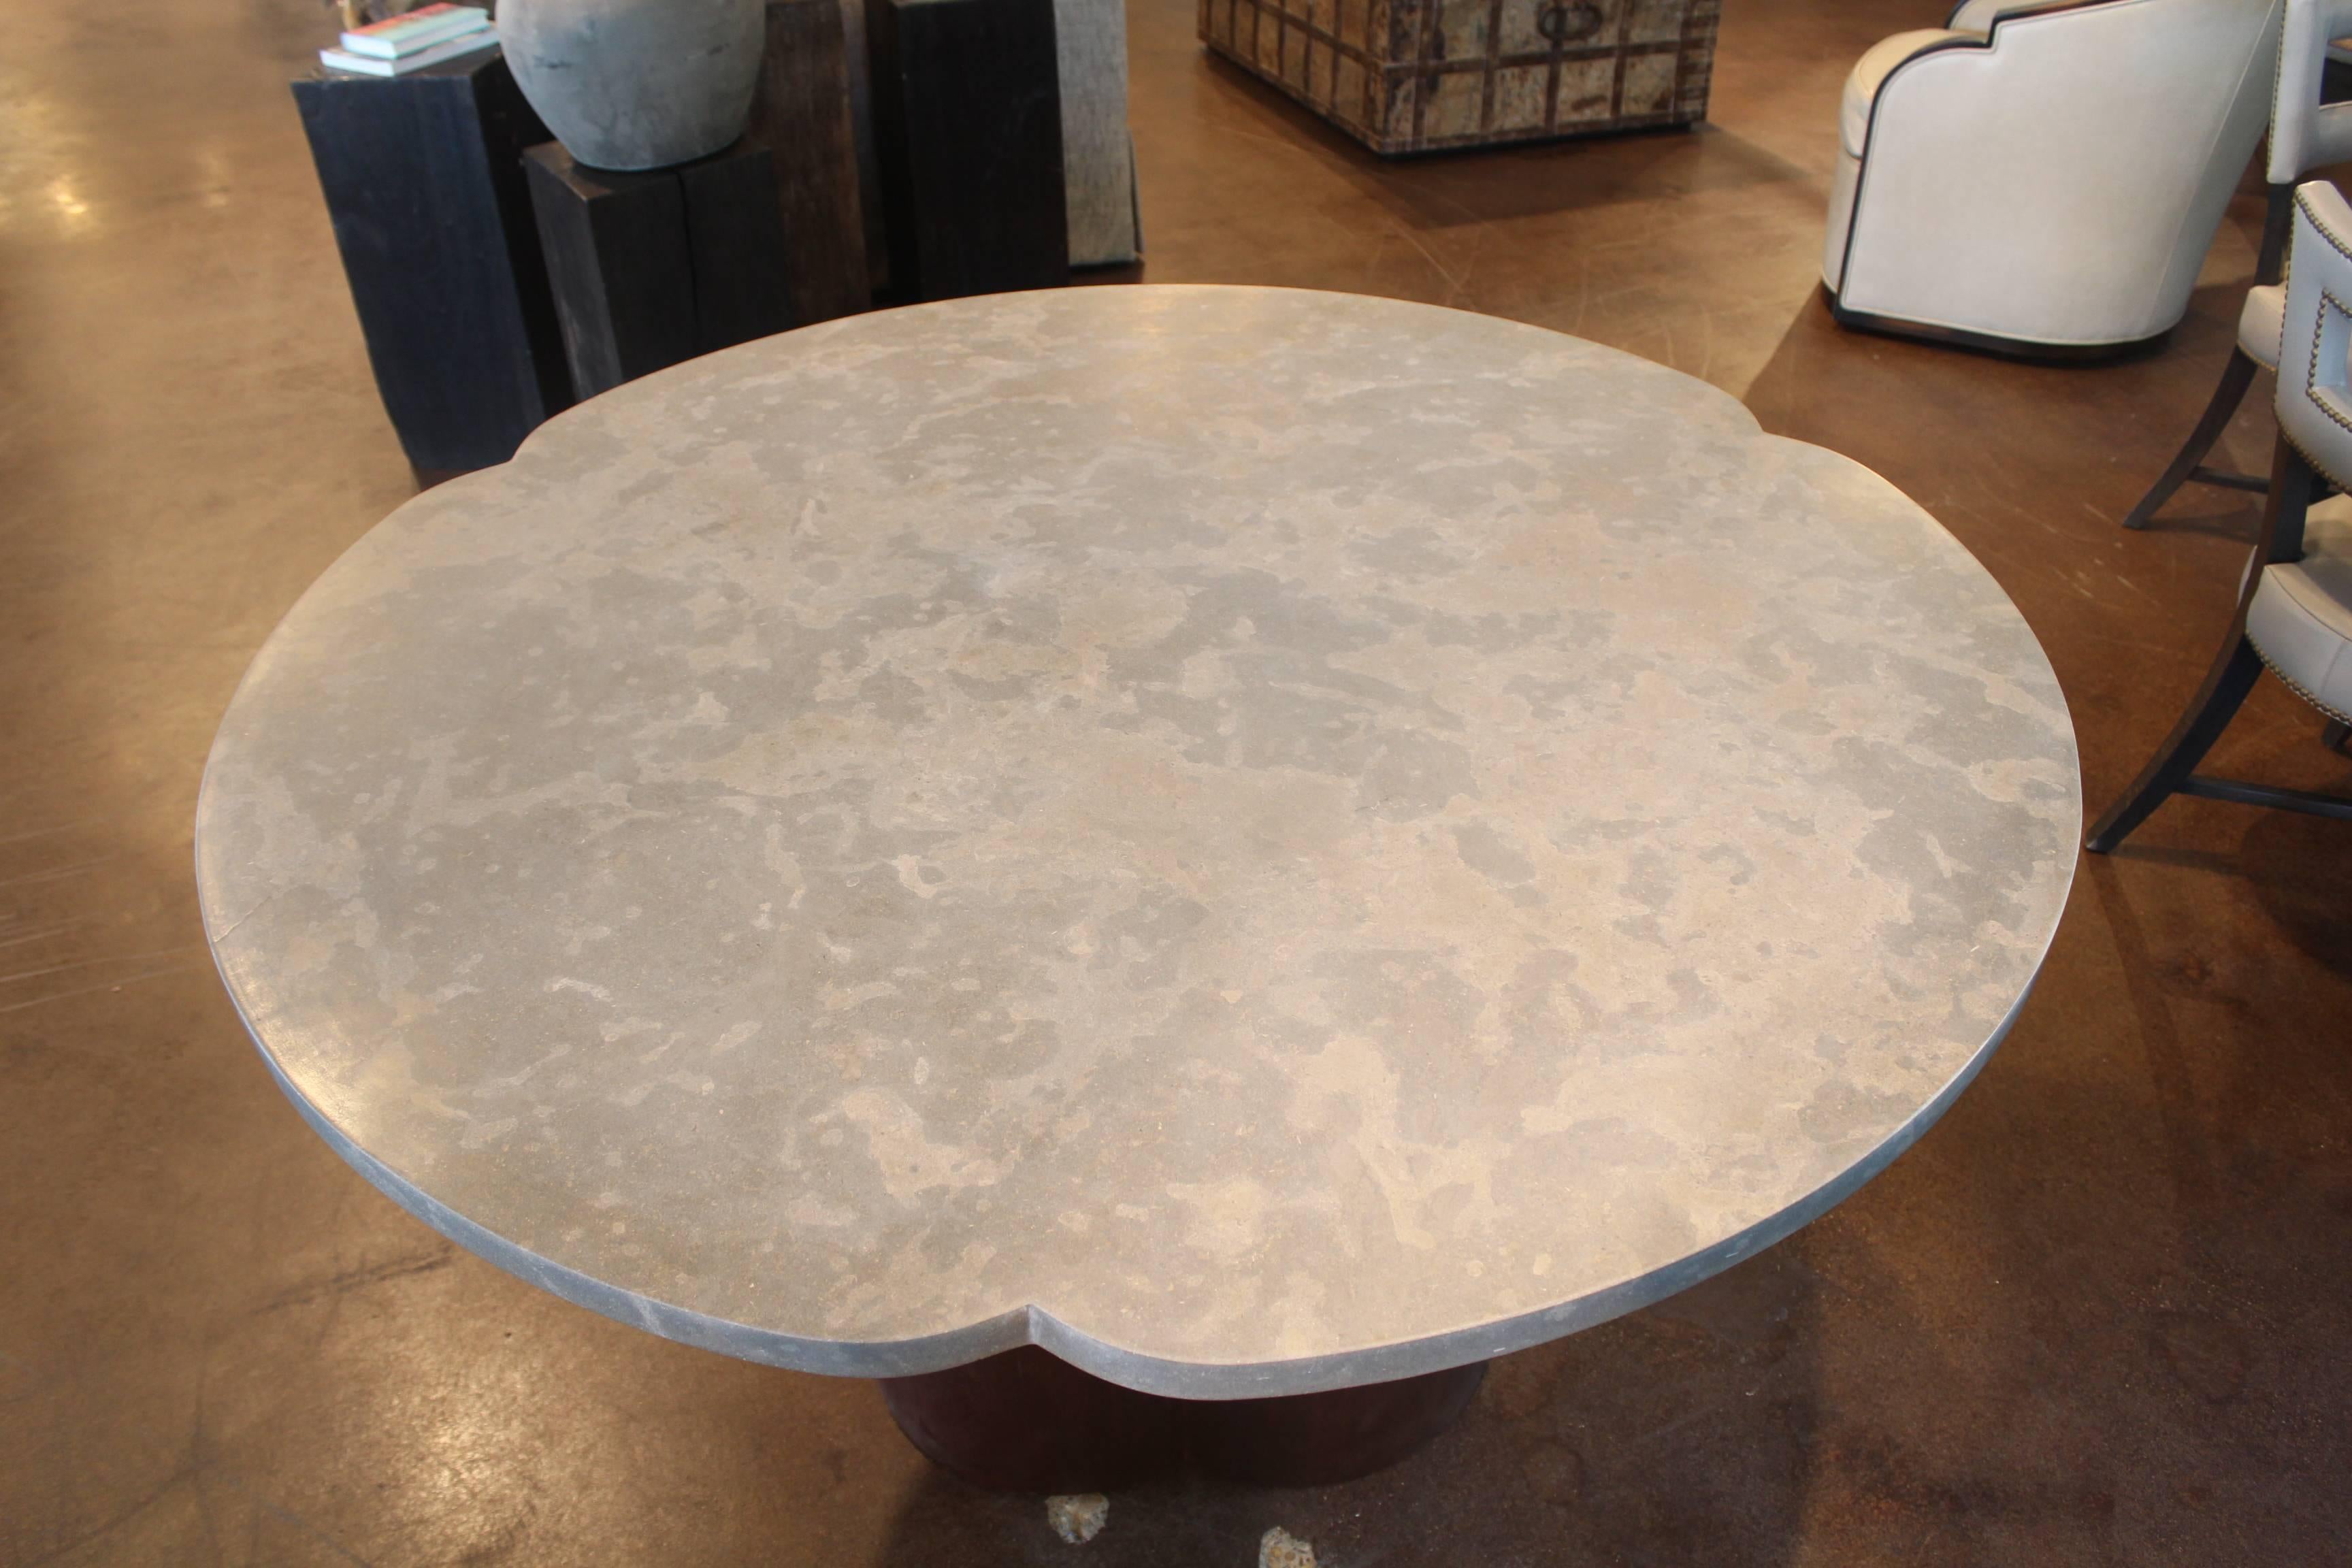 Clover shaped Italian dining table base, with honed lagos azul limestone top.